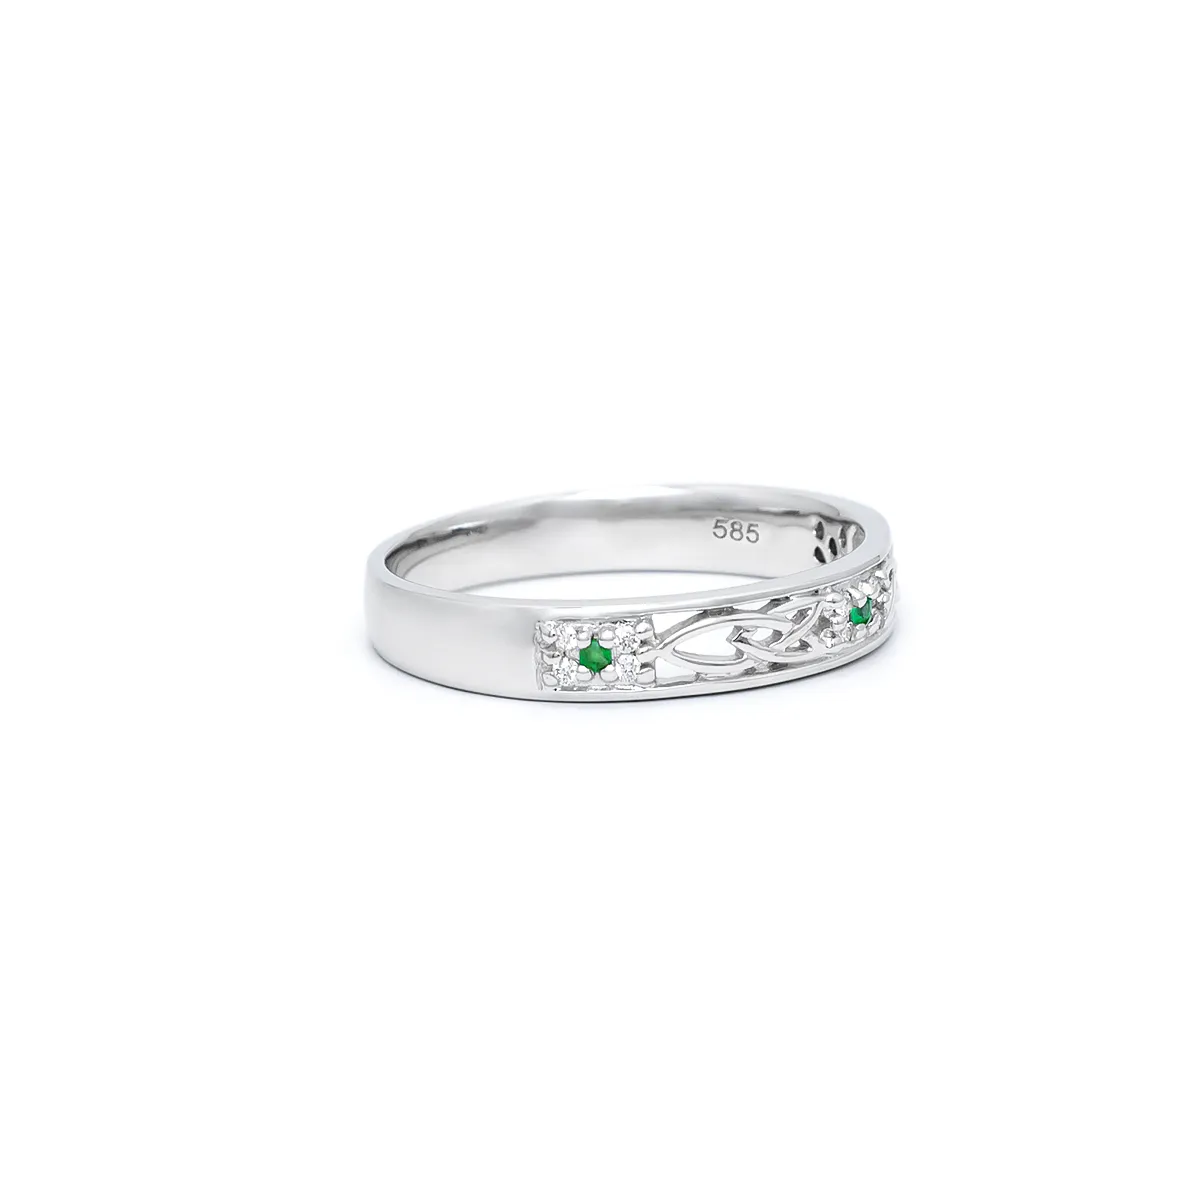 IJC00012 Celtic Ring With Emerald 03...